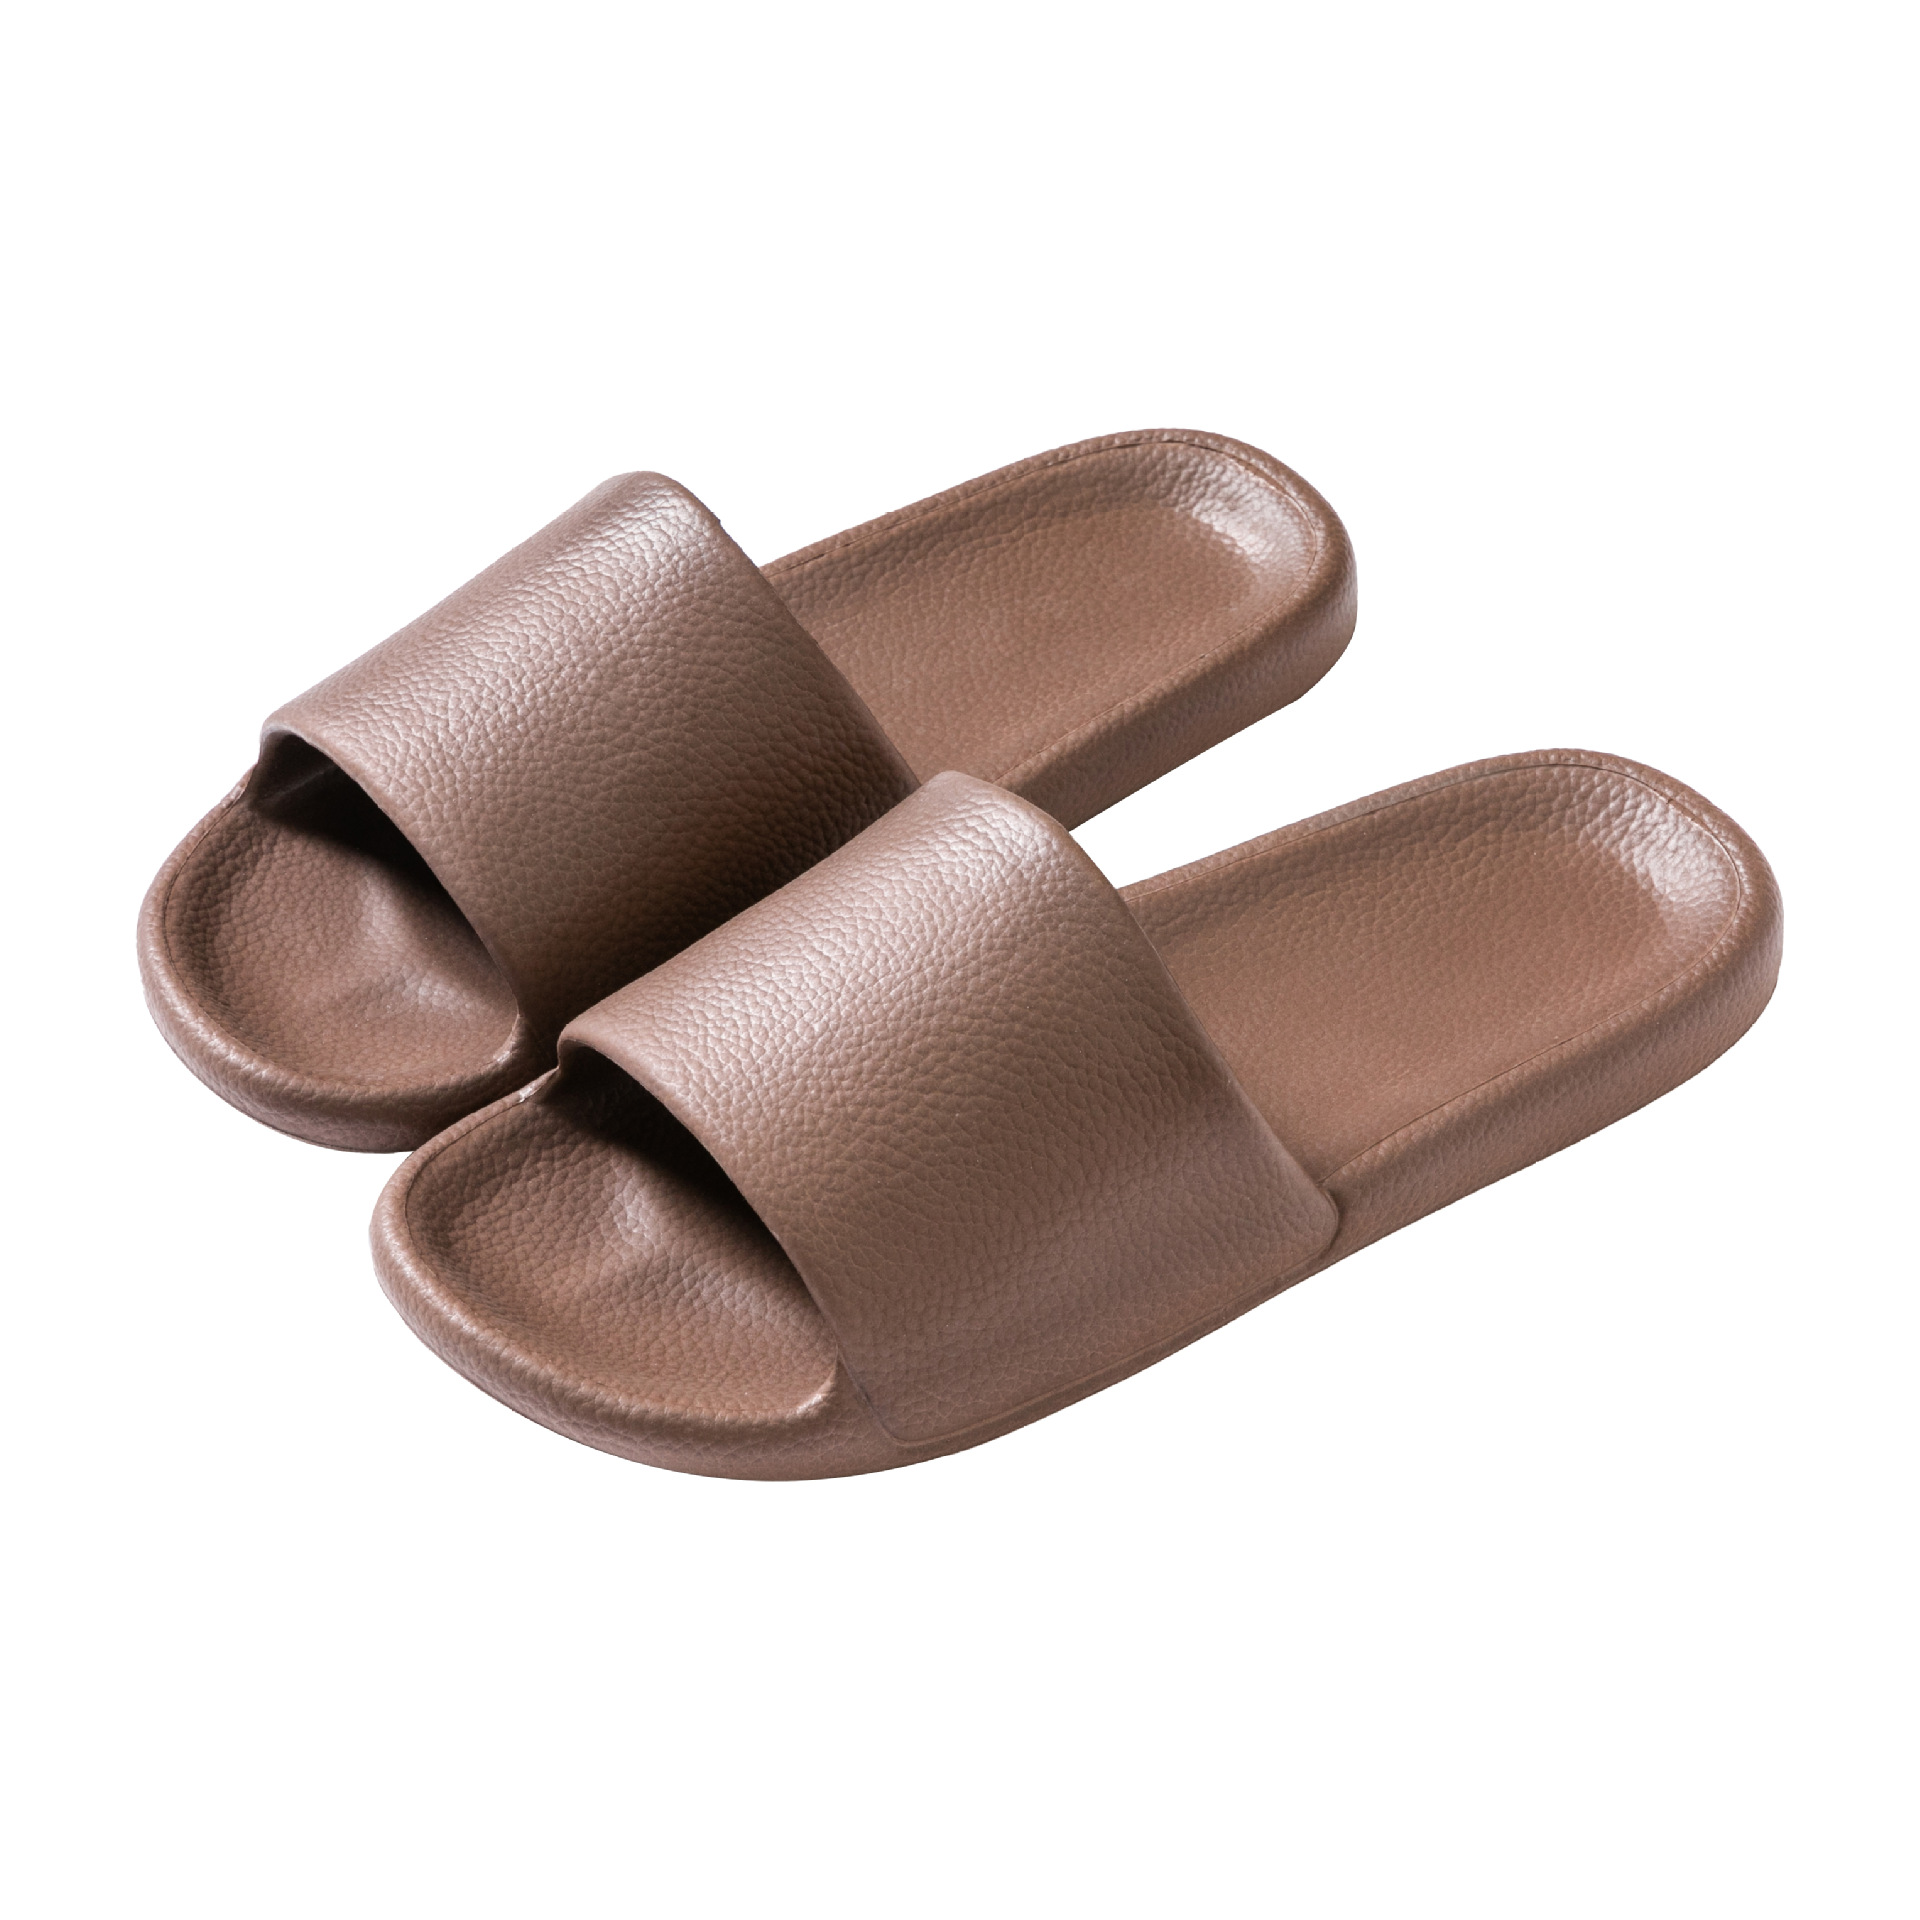 Slippers Men's Summer Outdoor Wear Indoor Home Couple Bathroom Bath Lightweight Women's Artificial Leather Surface Cool Shoes